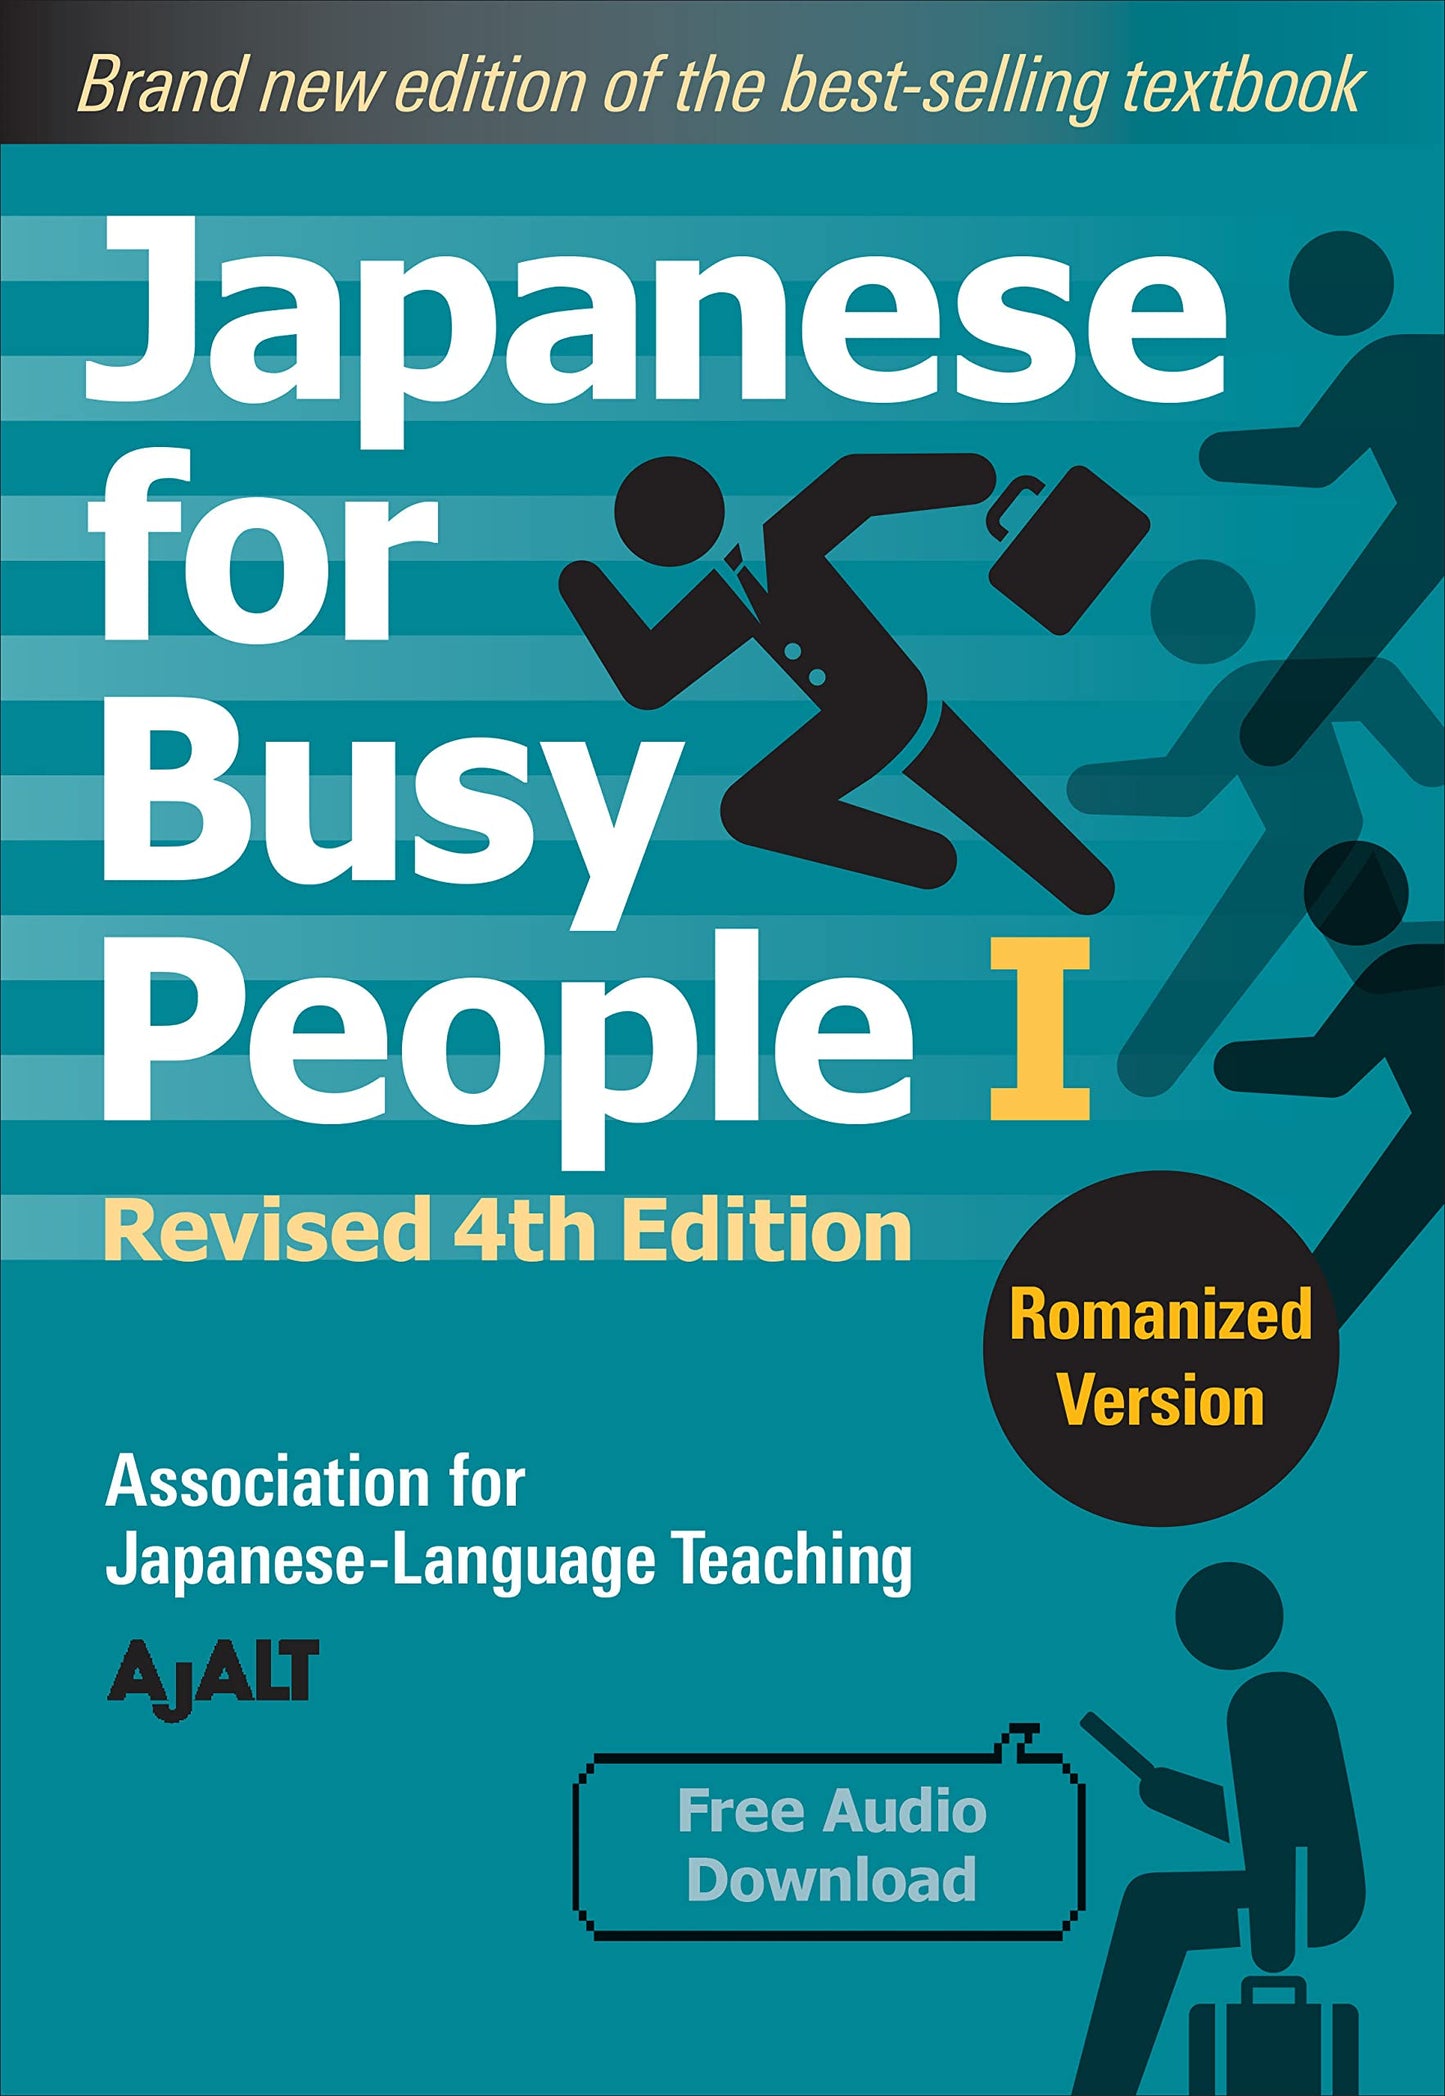 Japanese for Busy People I - Romanized